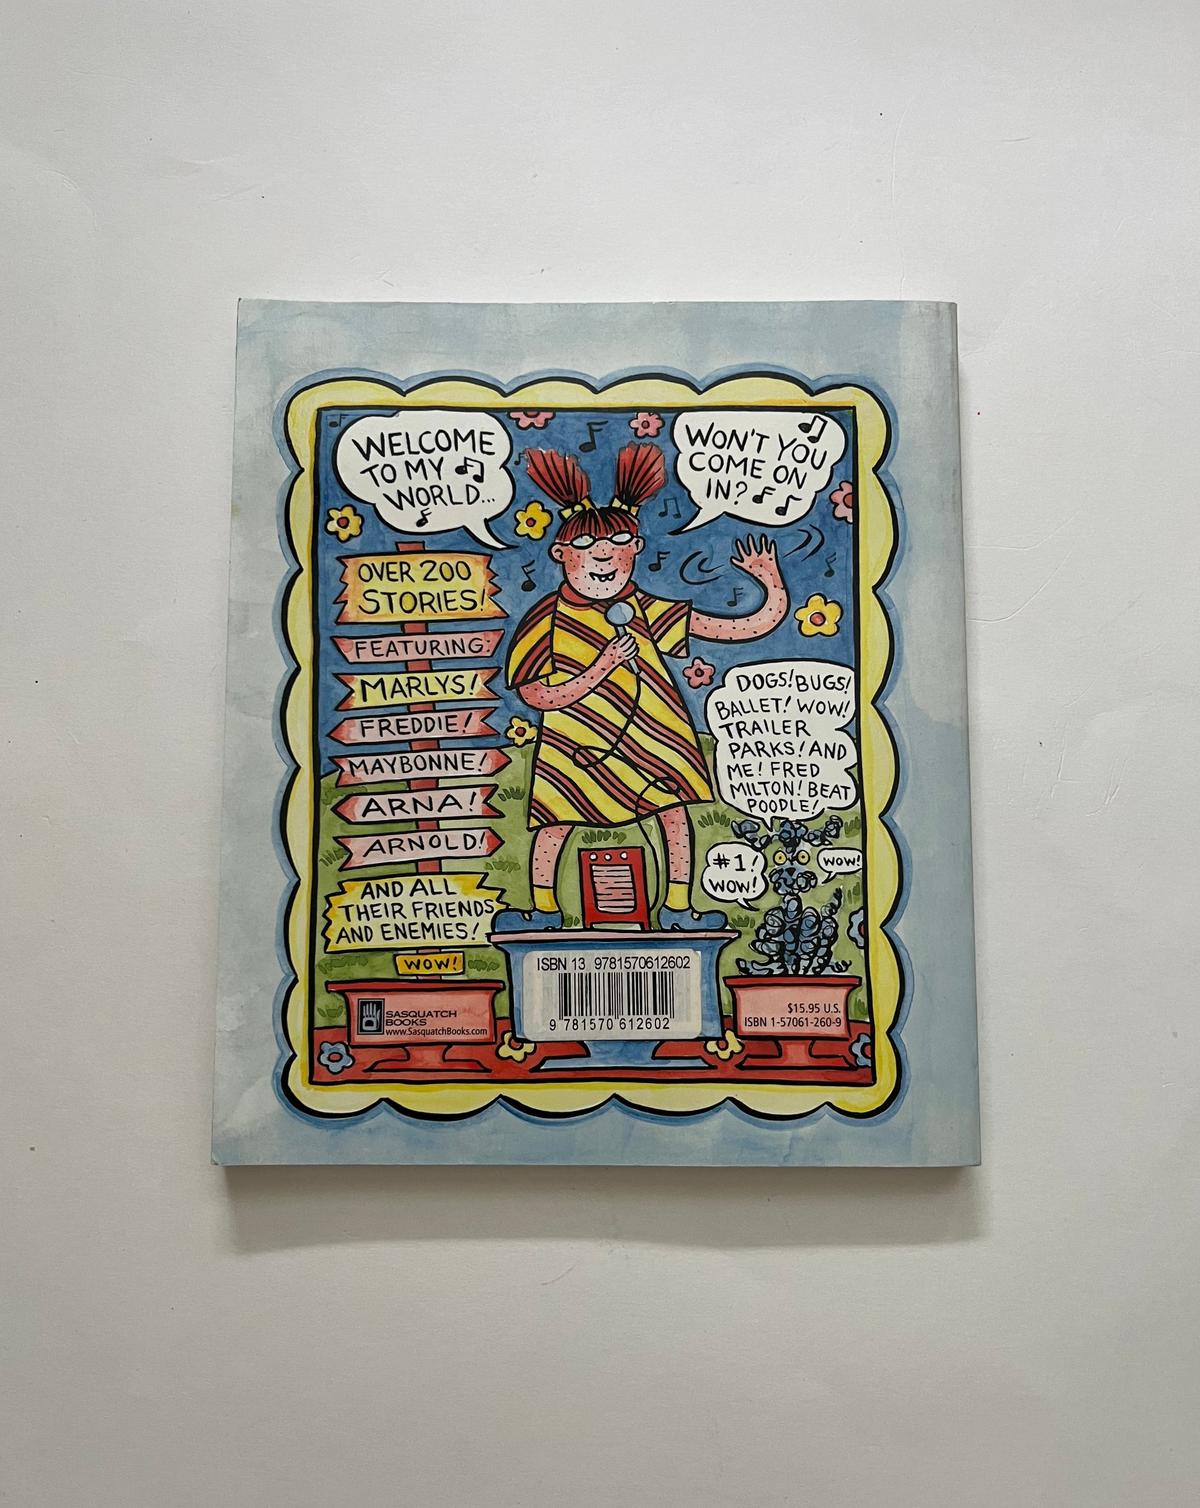 The Greatest of Marlys! by Lynda Barry